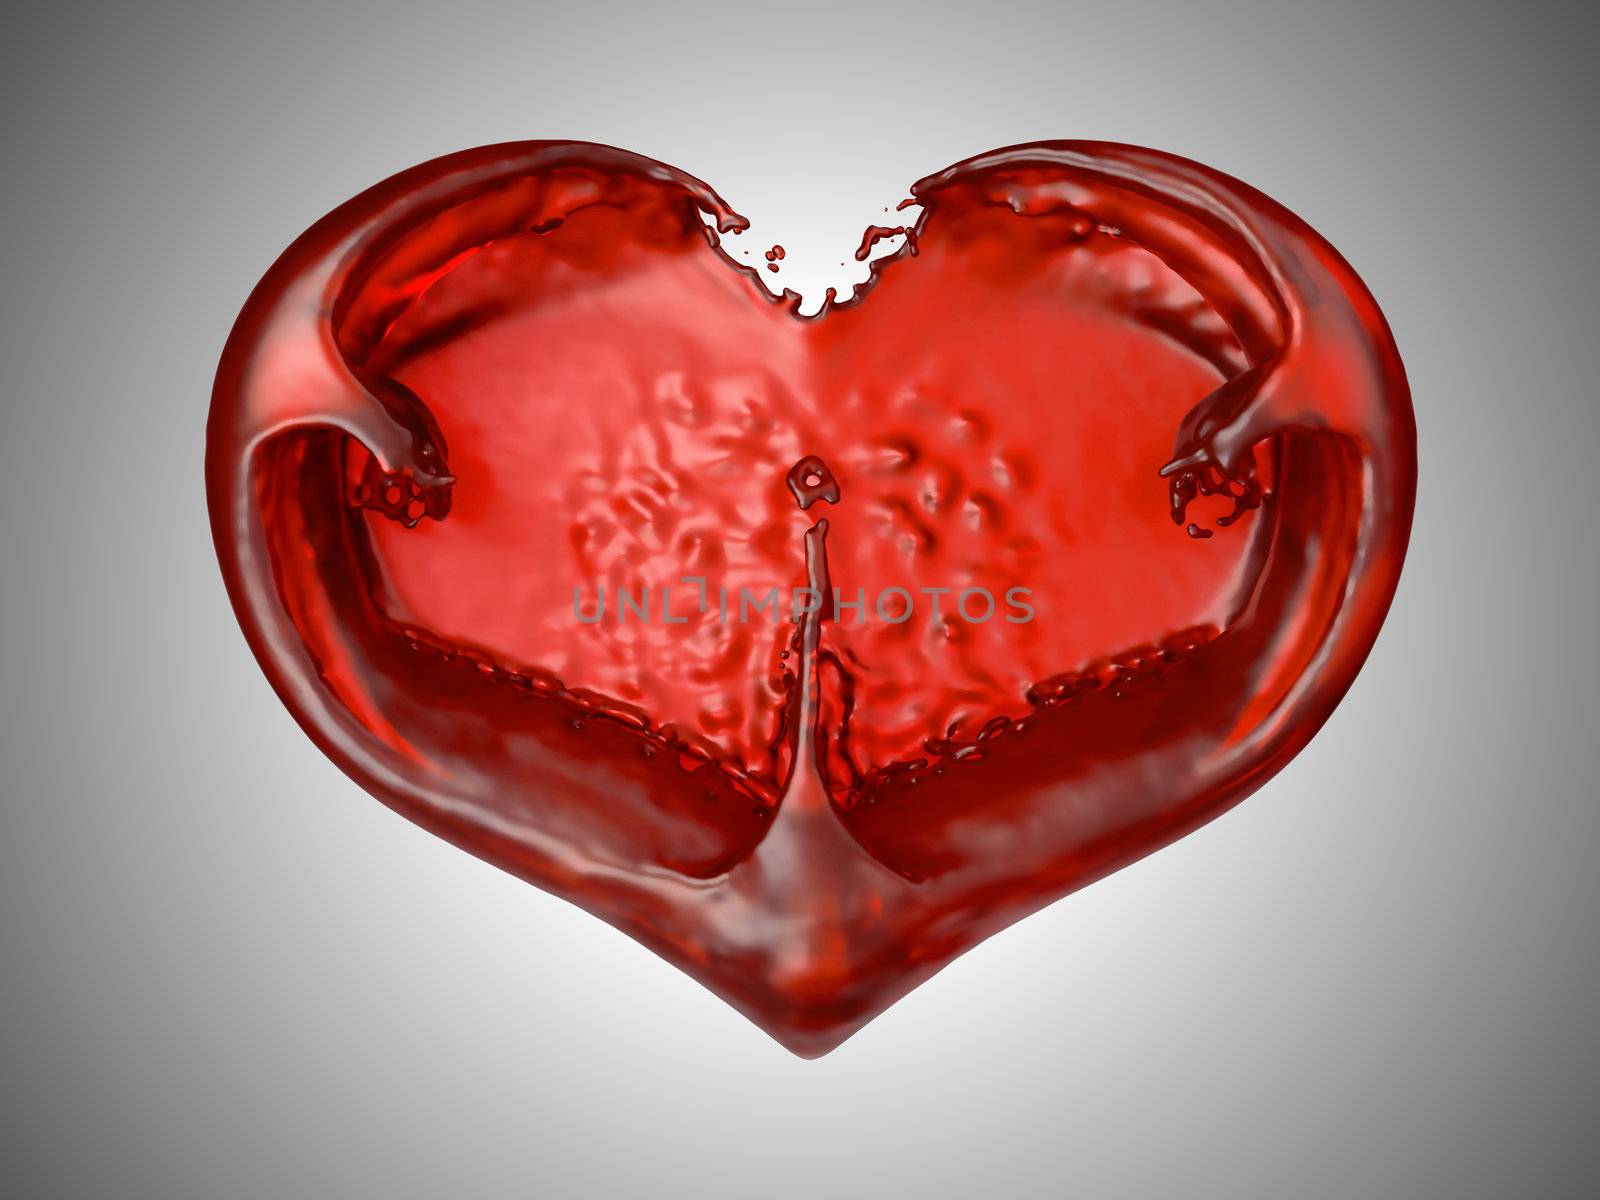 Love and Romance - Red liquid heart shape. Over grey background